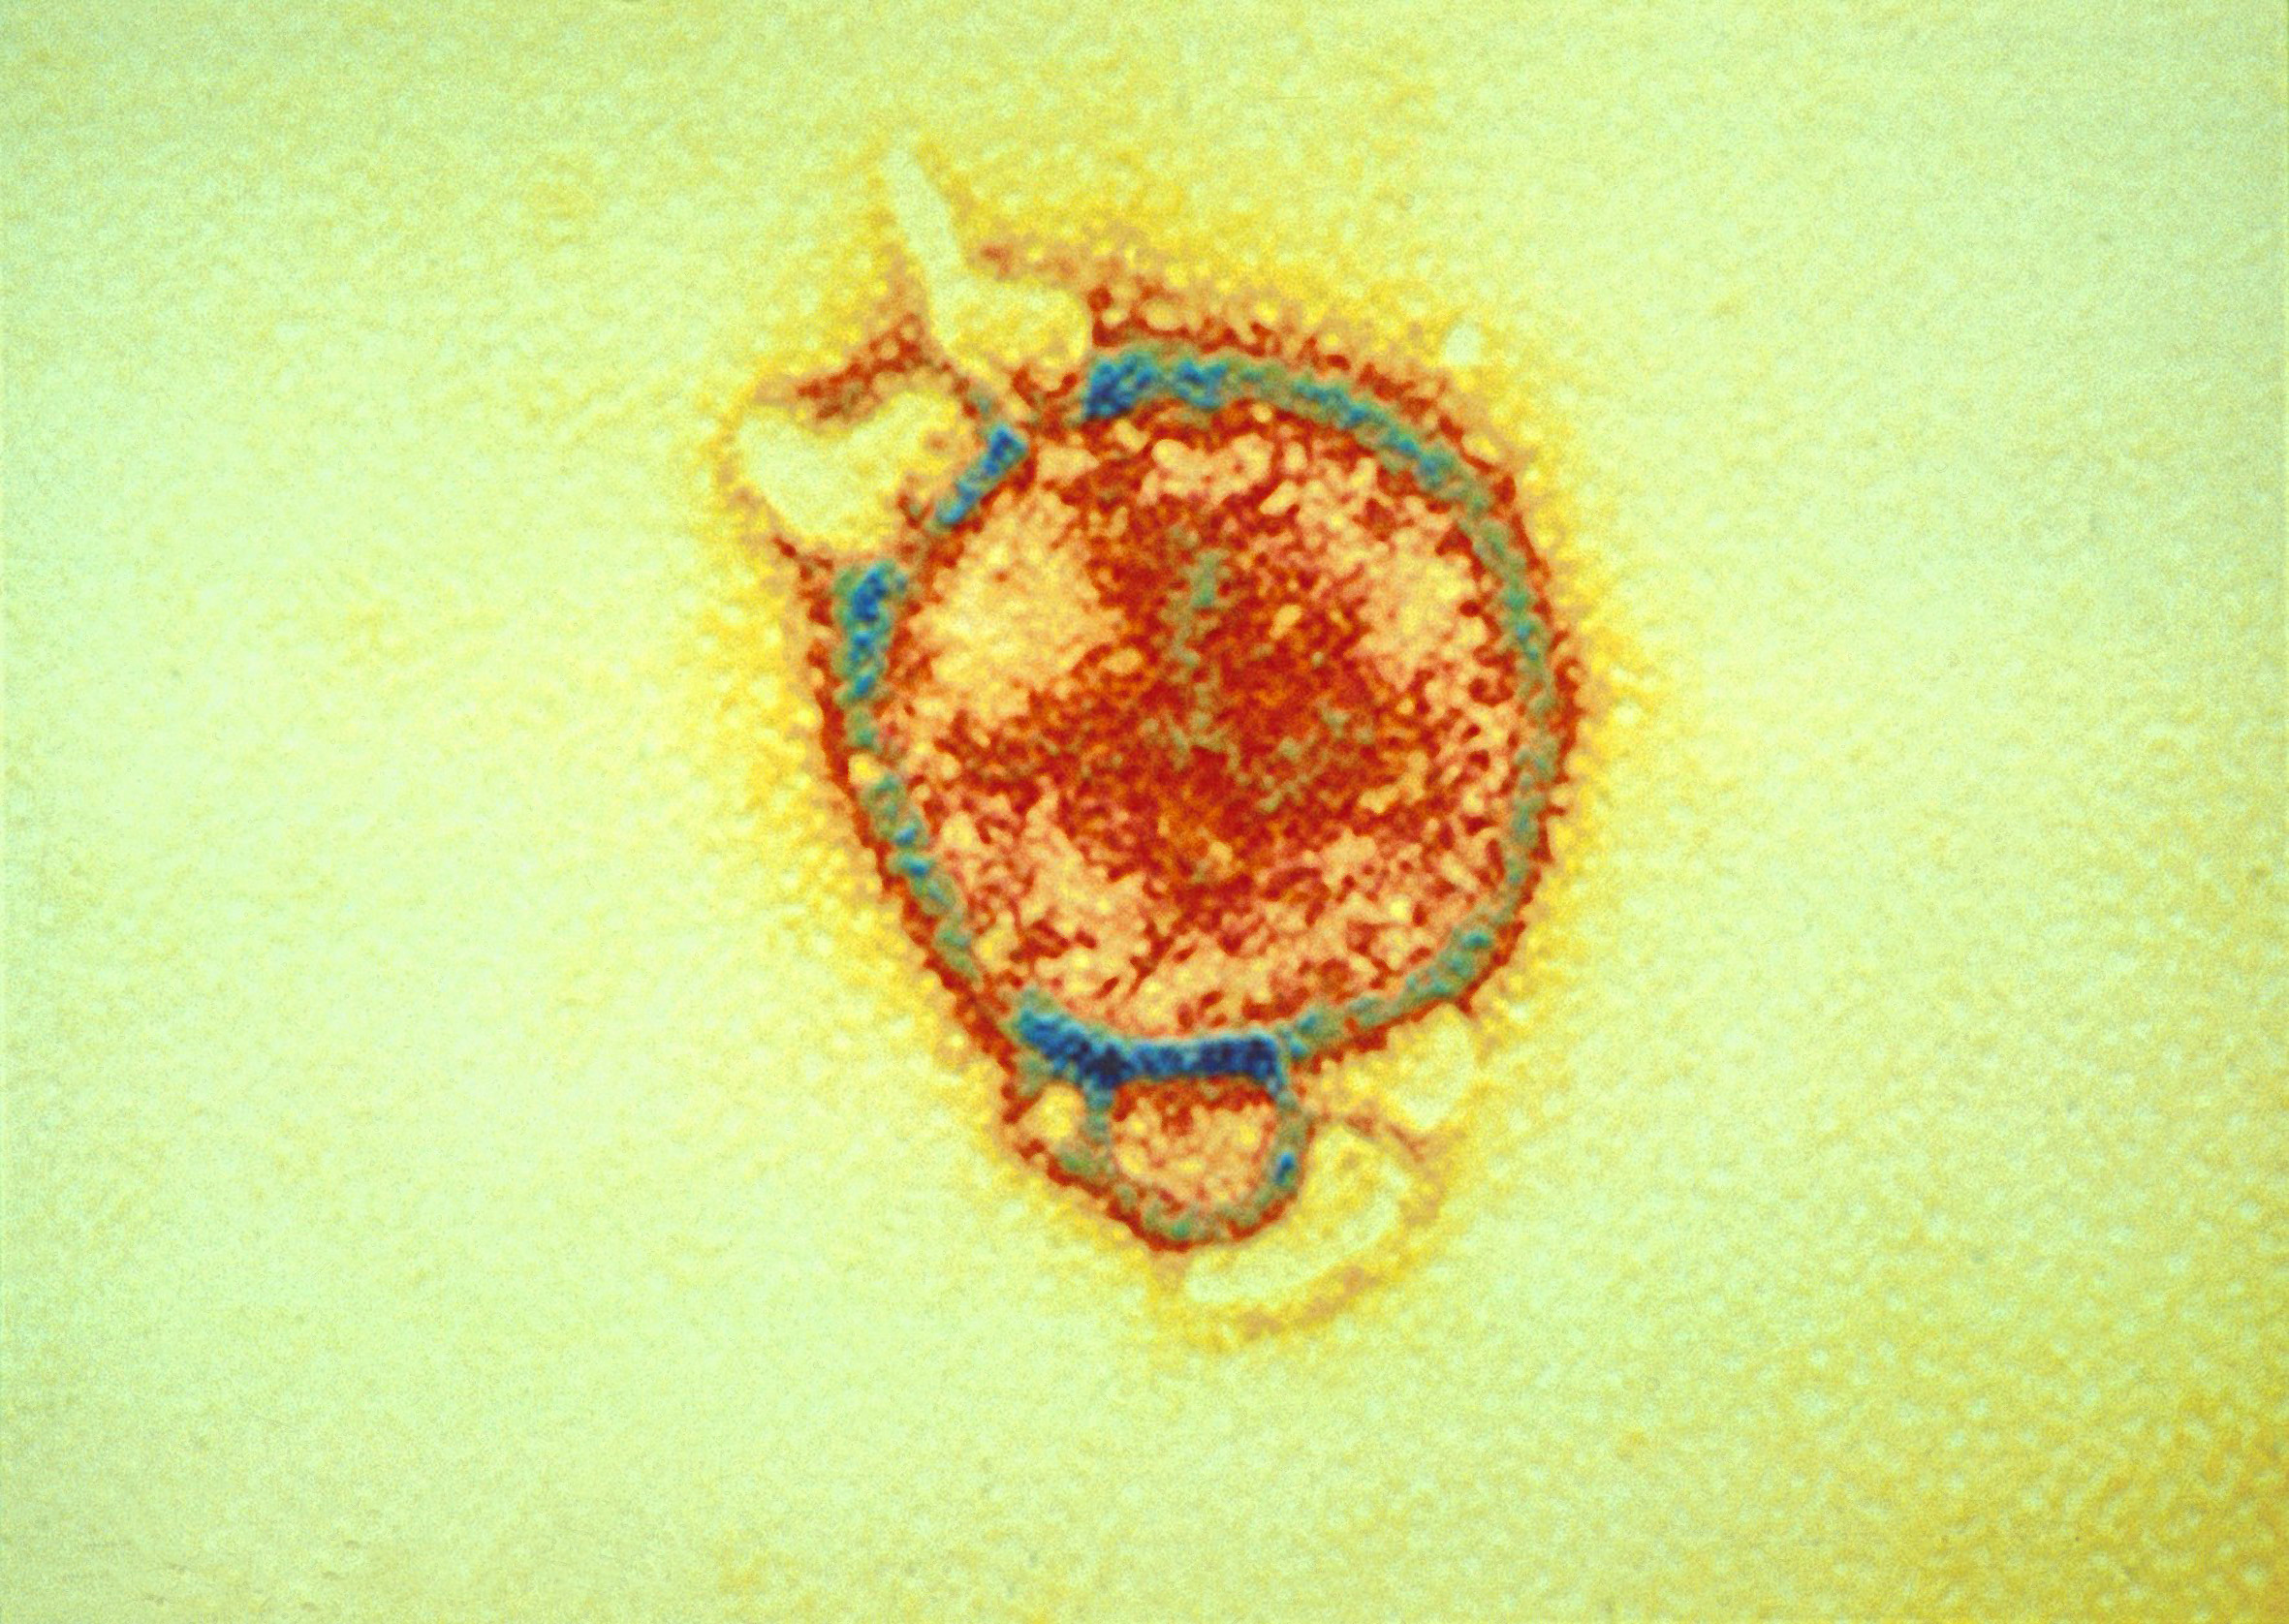 In 1994-95 a new virus appeared in Queensland, killing two humans and fifteen horses in two separate outbreaks. In January 1999, another horse, near Cairns, died of the disease. This virus is now called Hendra virus. This image shows a coloured transmission electron micrograph of the virus. Image produced by Electron Microscopy Unit, Australian Animal Health Laboratory.